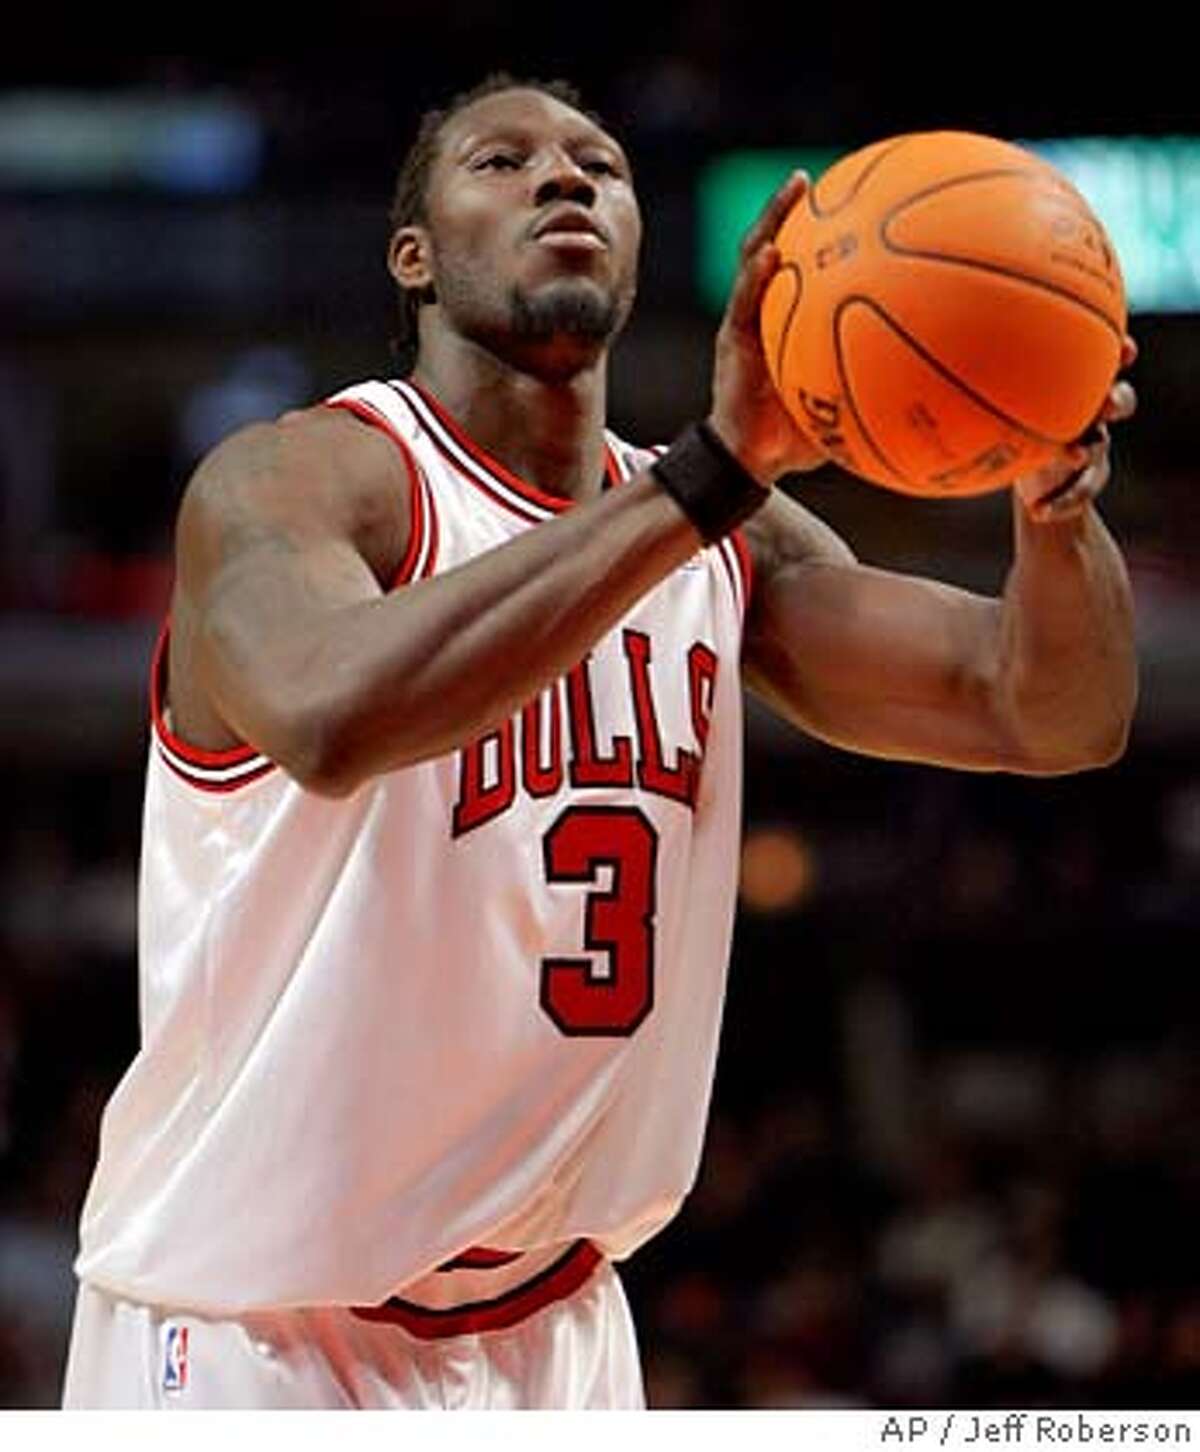 Chicago Bulls' Ben Wallace shoots a free throw during the second quarter of a pre-season NBA basketball game against the Washington Wizards, Wednesday, Oct. 11, 2006 in Chicago. (AP Photo/Jeff Roberson)